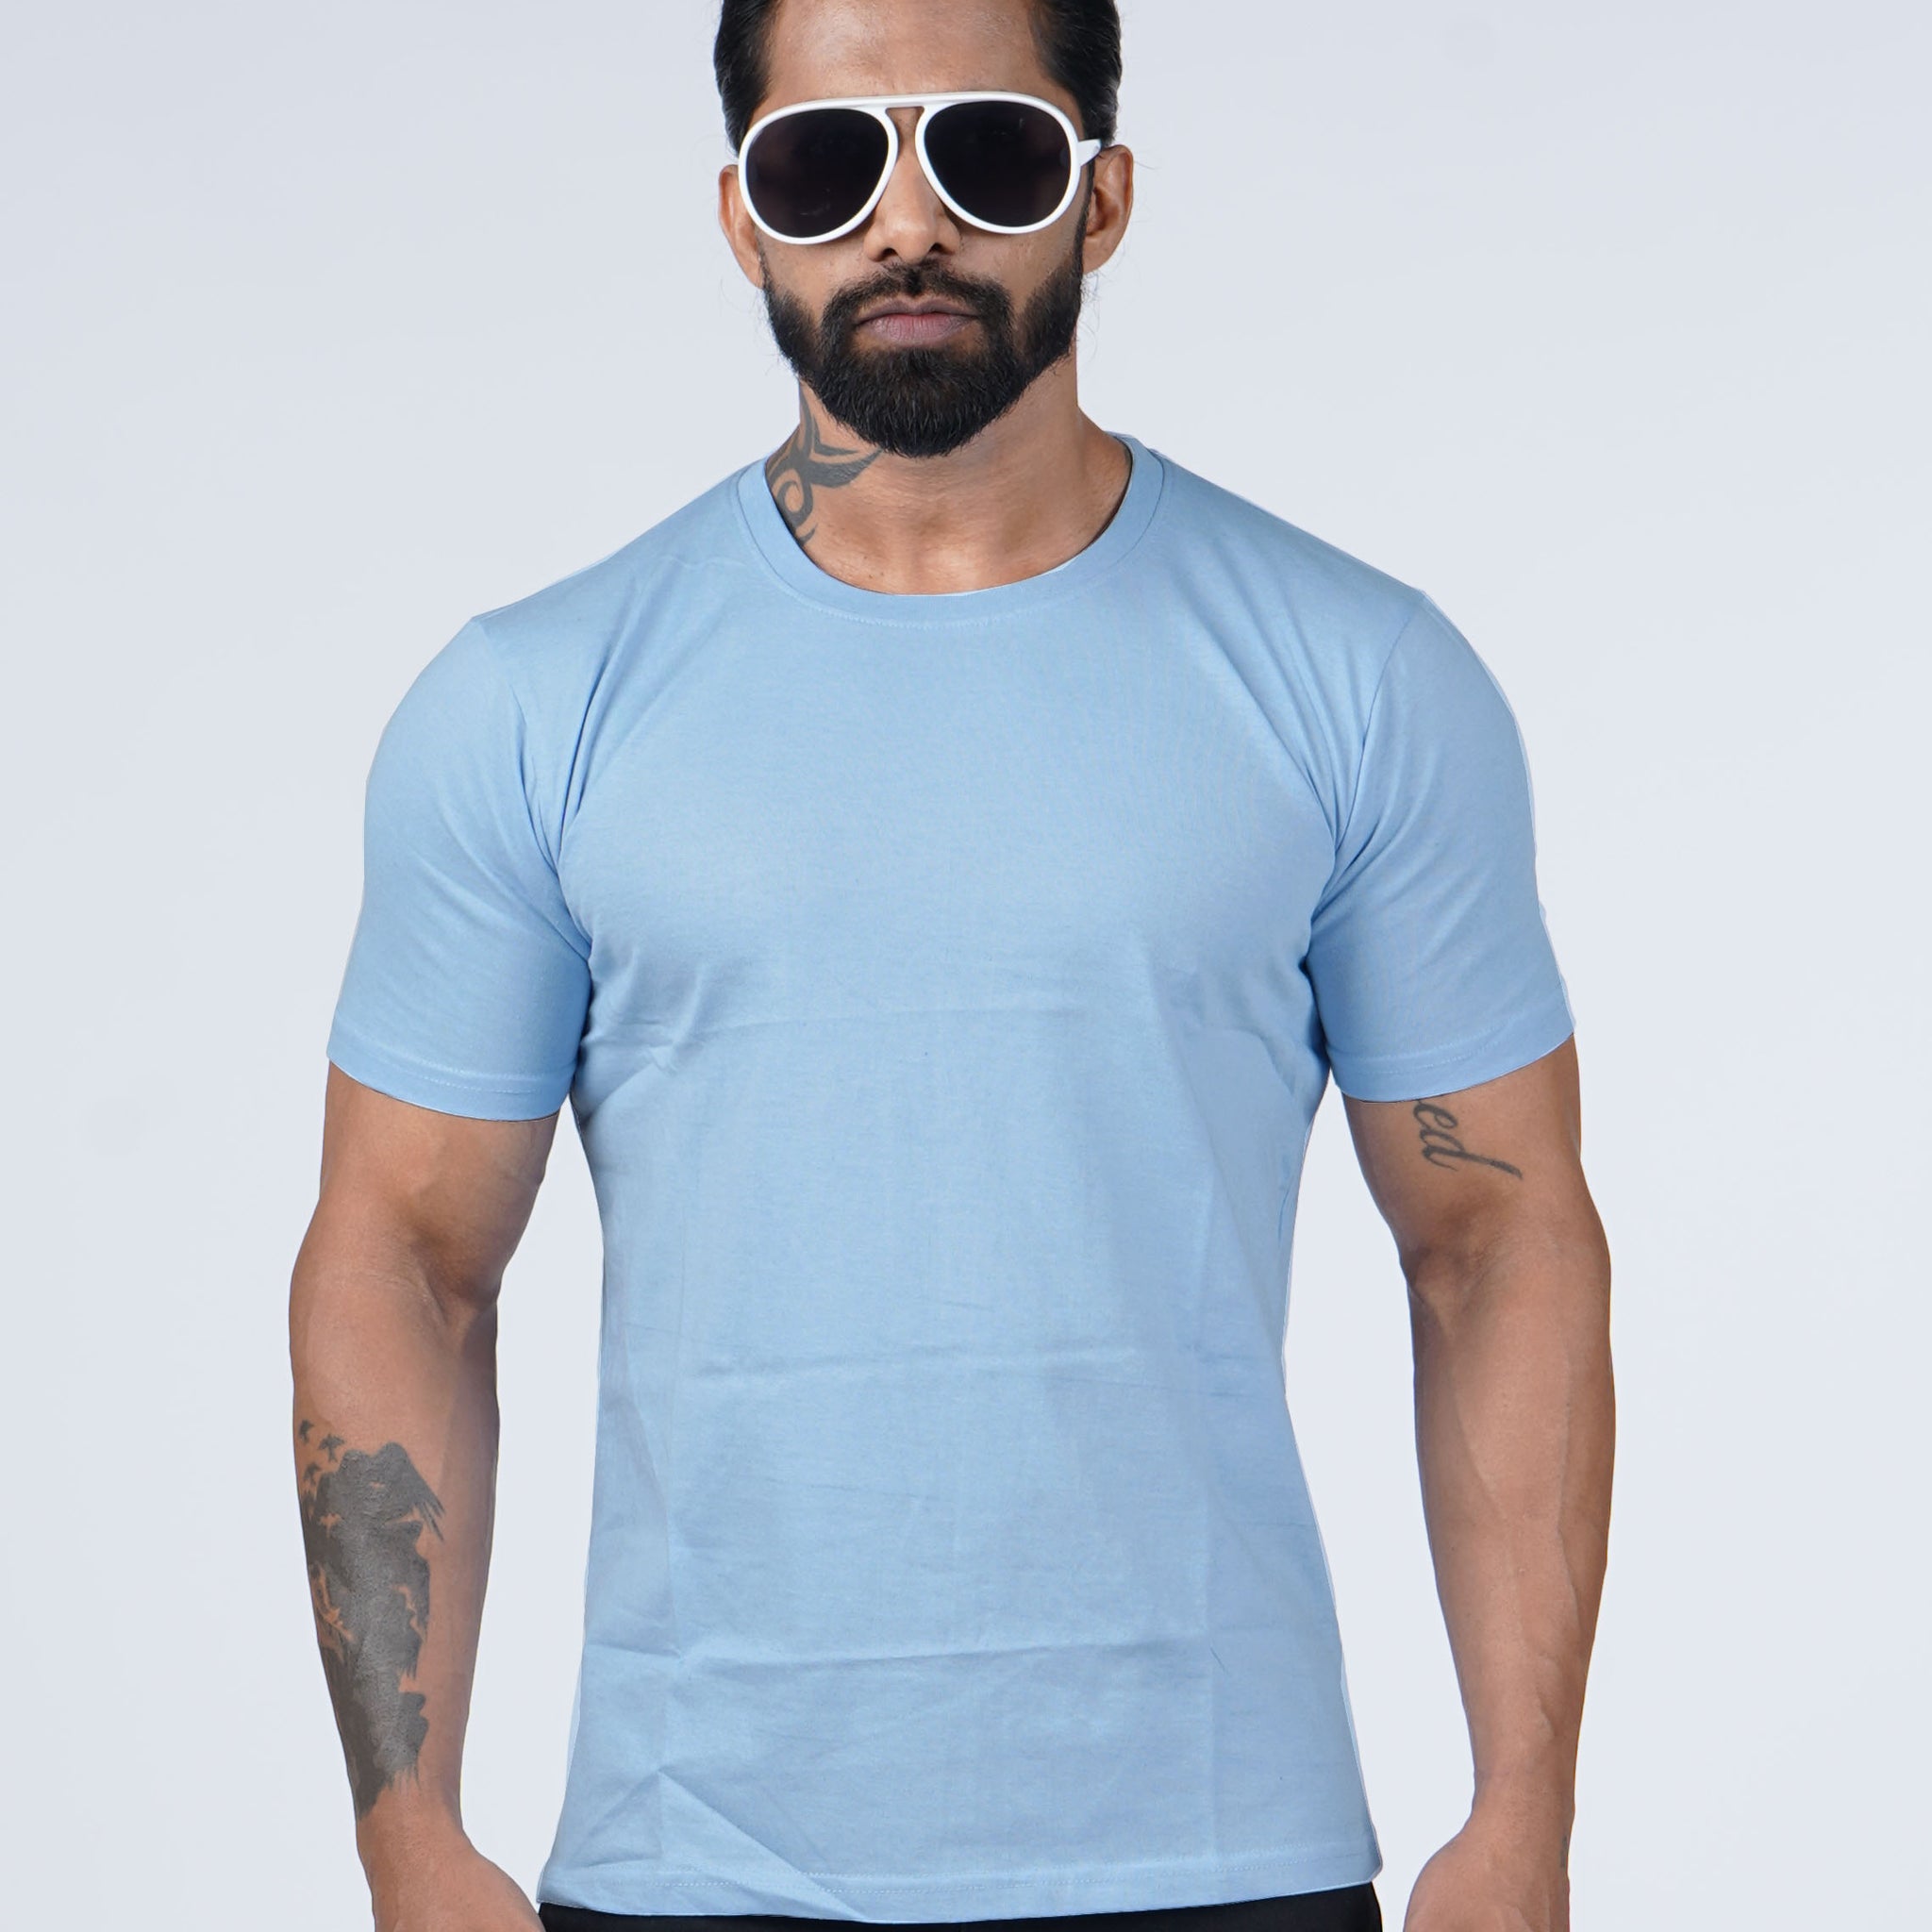 SkyBlue Solid T-shirt Crew Cut/Round Neck Short Sleeves